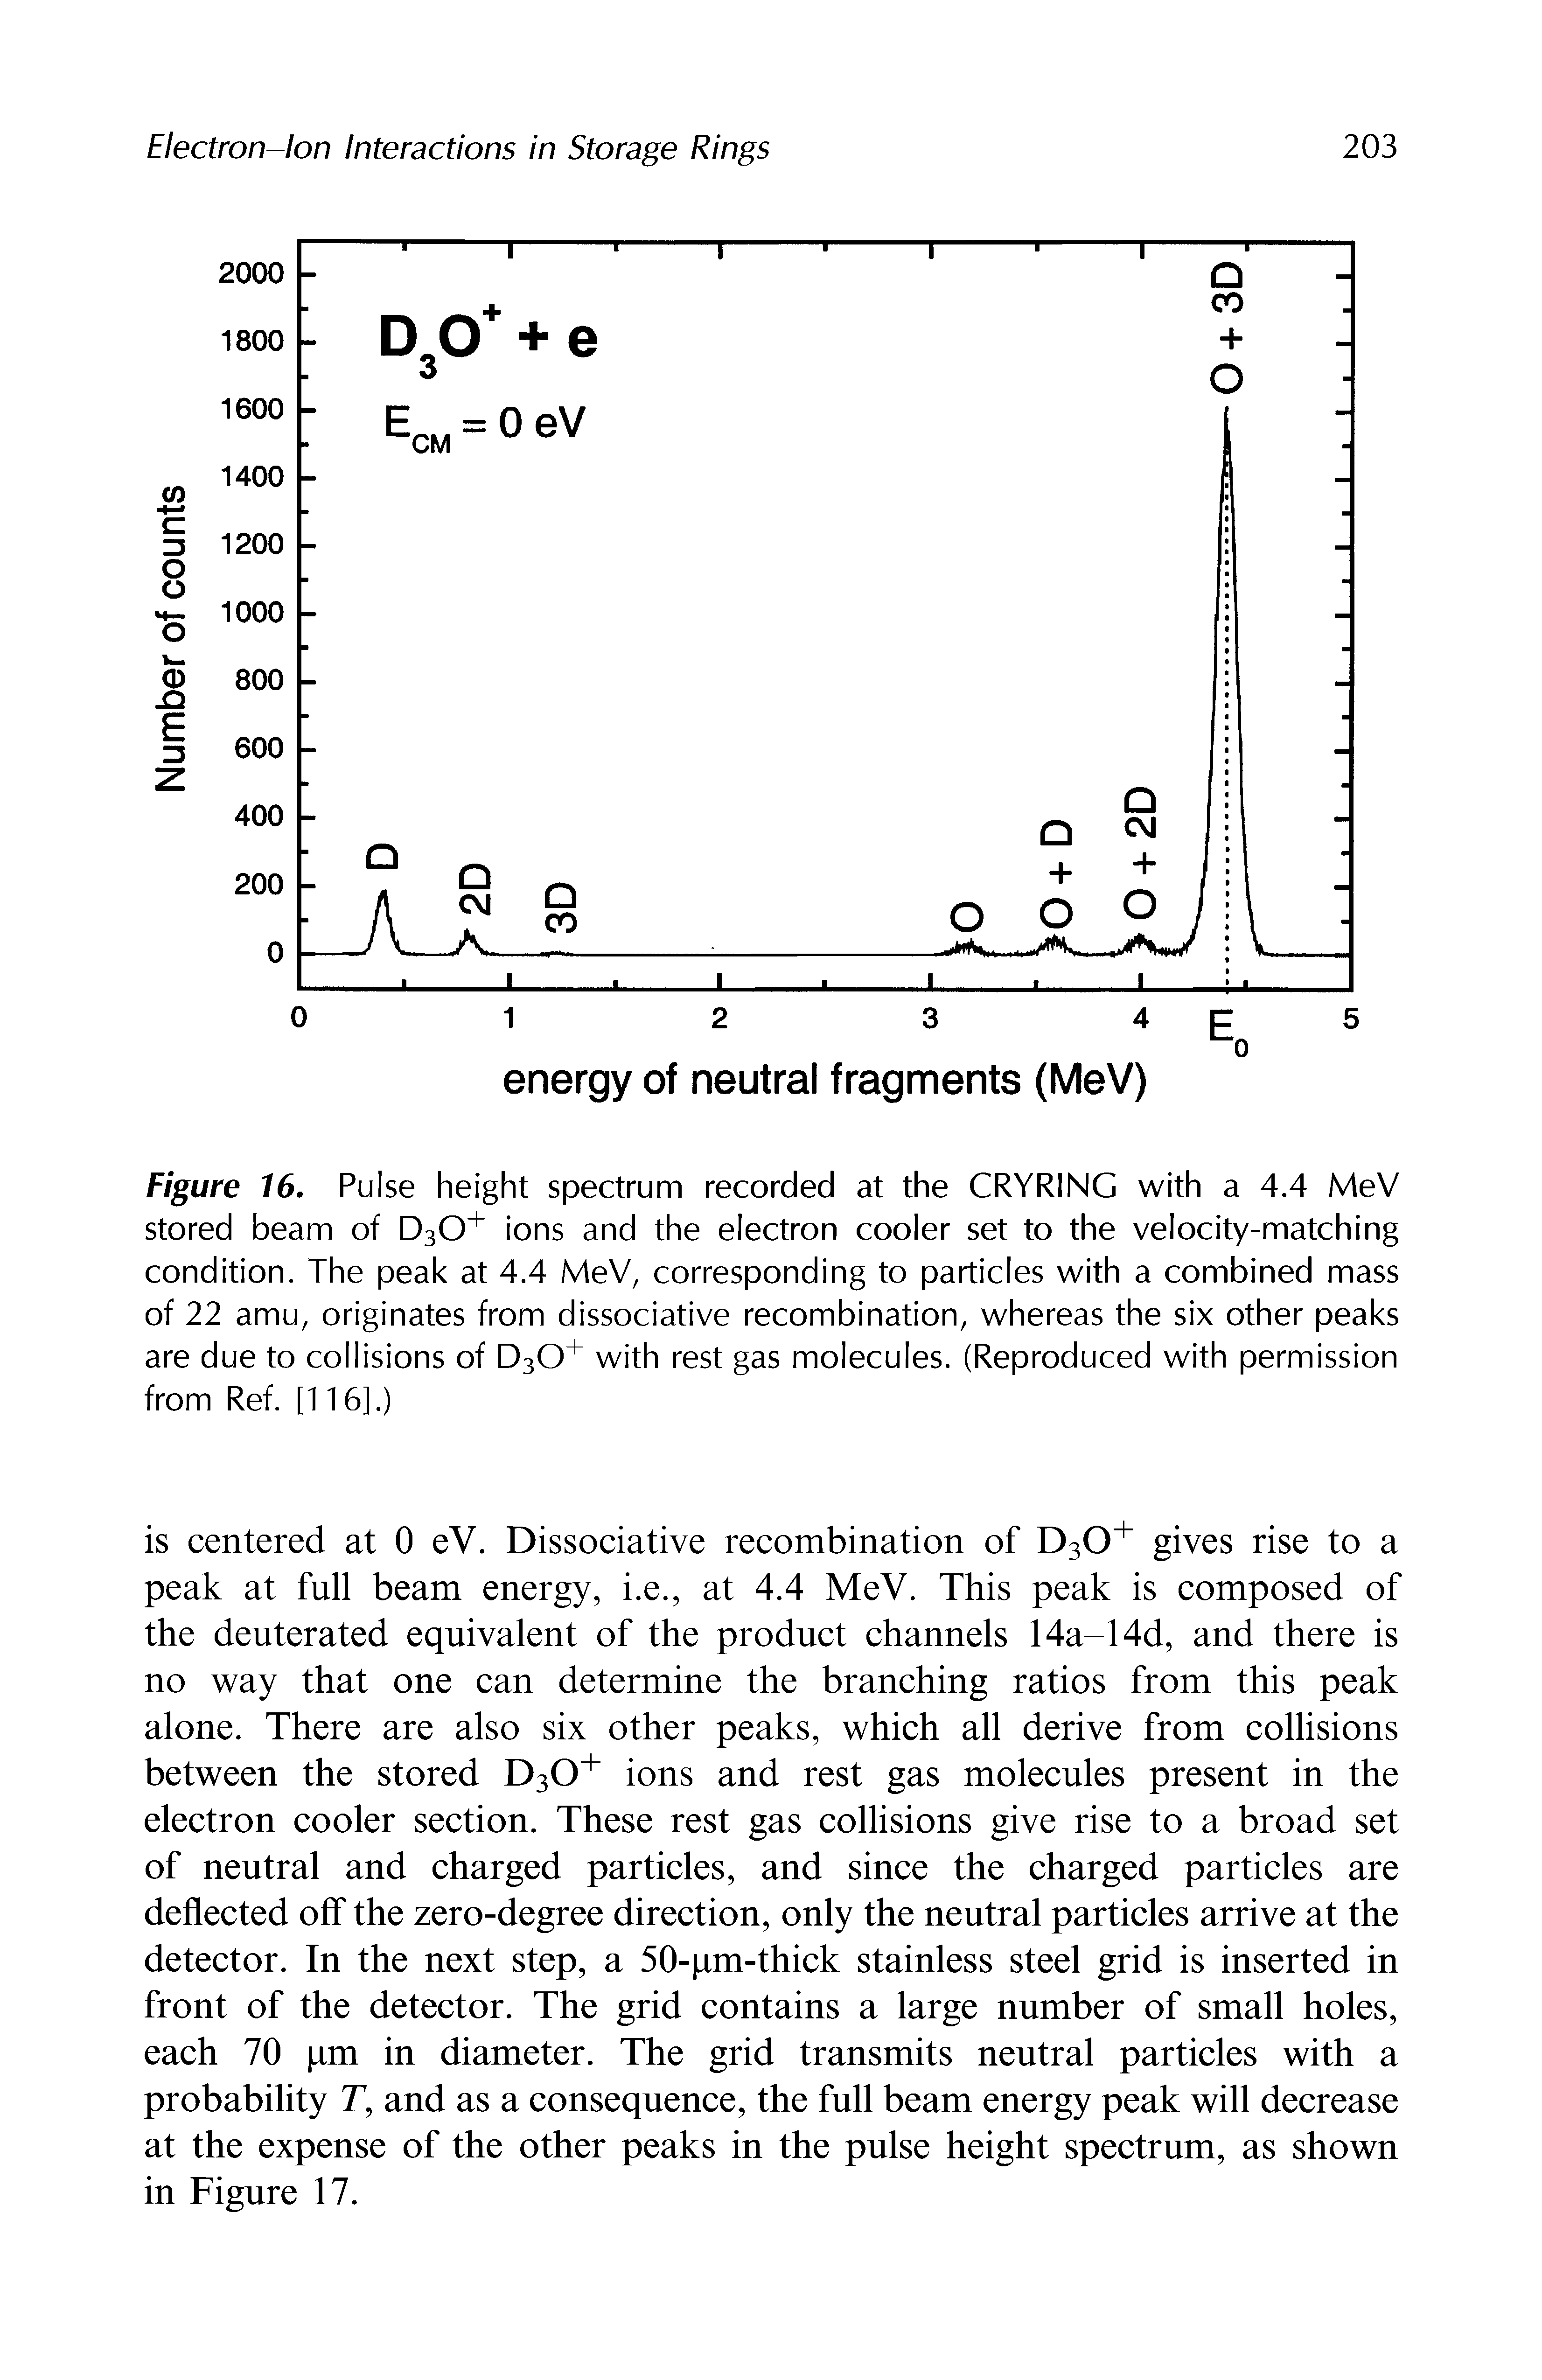 Figure 16, Pulse height spectrum recorded at the CRYRING with a 4.4 MeV stored beam of 030 ions and the electron cooler set to the velocity-matching condition. The peak at 4.4 MeV, corresponding to particles with a combined mass of 22 amu, originates from dissociative recombination, whereas the six other peaks are due to collisions of 030 with rest gas molecules. (Reproduced with permission from Ref. [116].)...